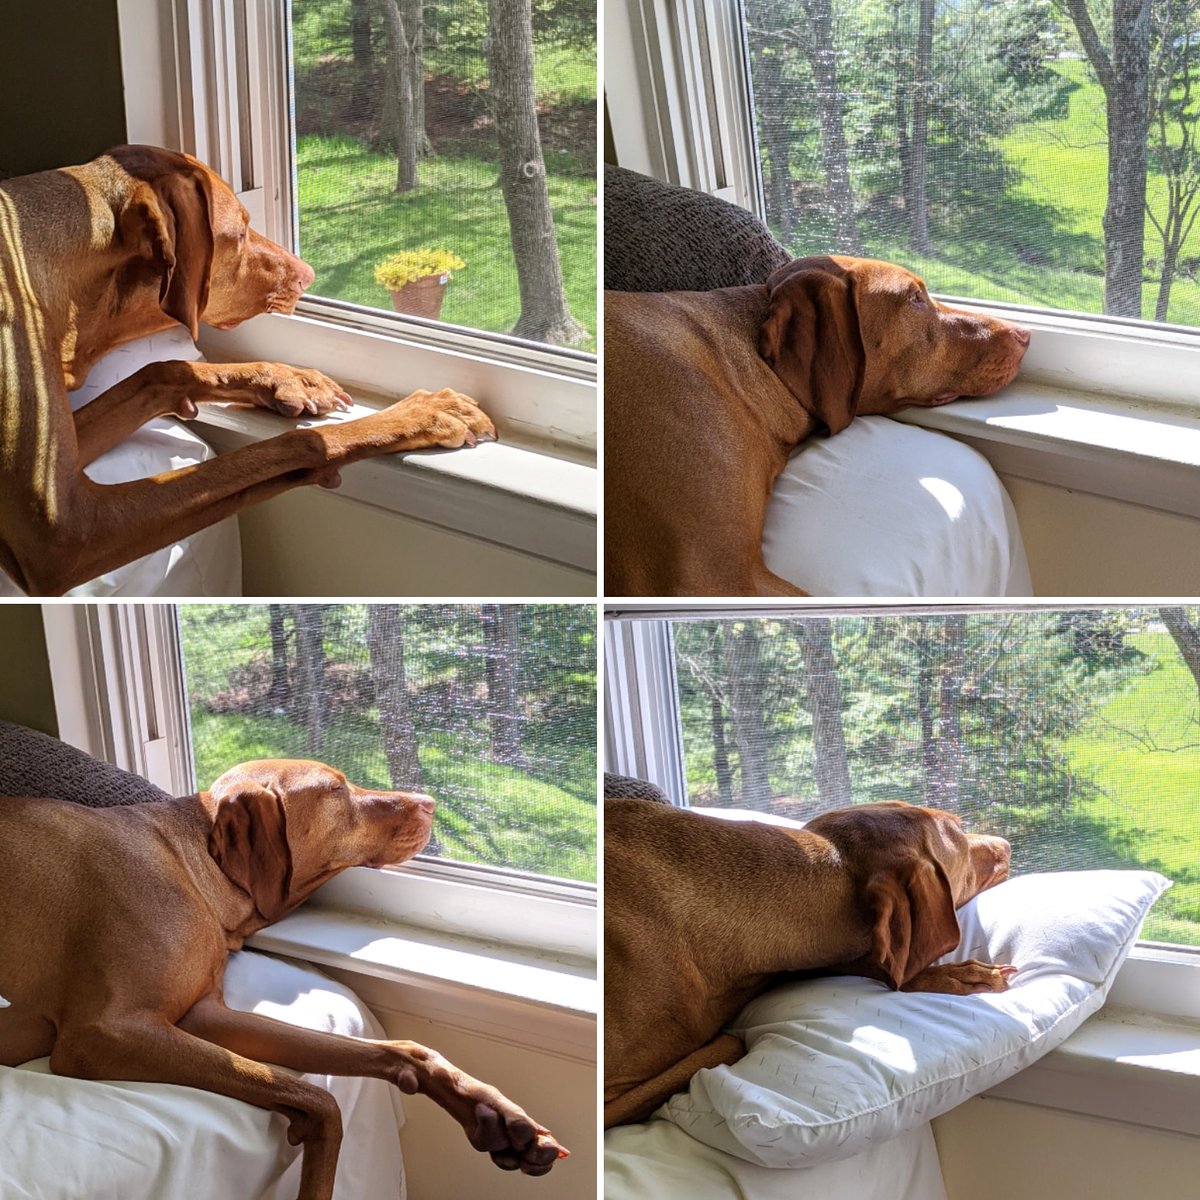 Last week Argos was leaning on the windowsill for smells & sunshine. So, understanding craving the outdoors, I moved the guest bed under the window. Earlier he was laying directly on the window track, so now he's got a pillow for his face, too. #NotSpoiledAtAll #CopperCatastrophe